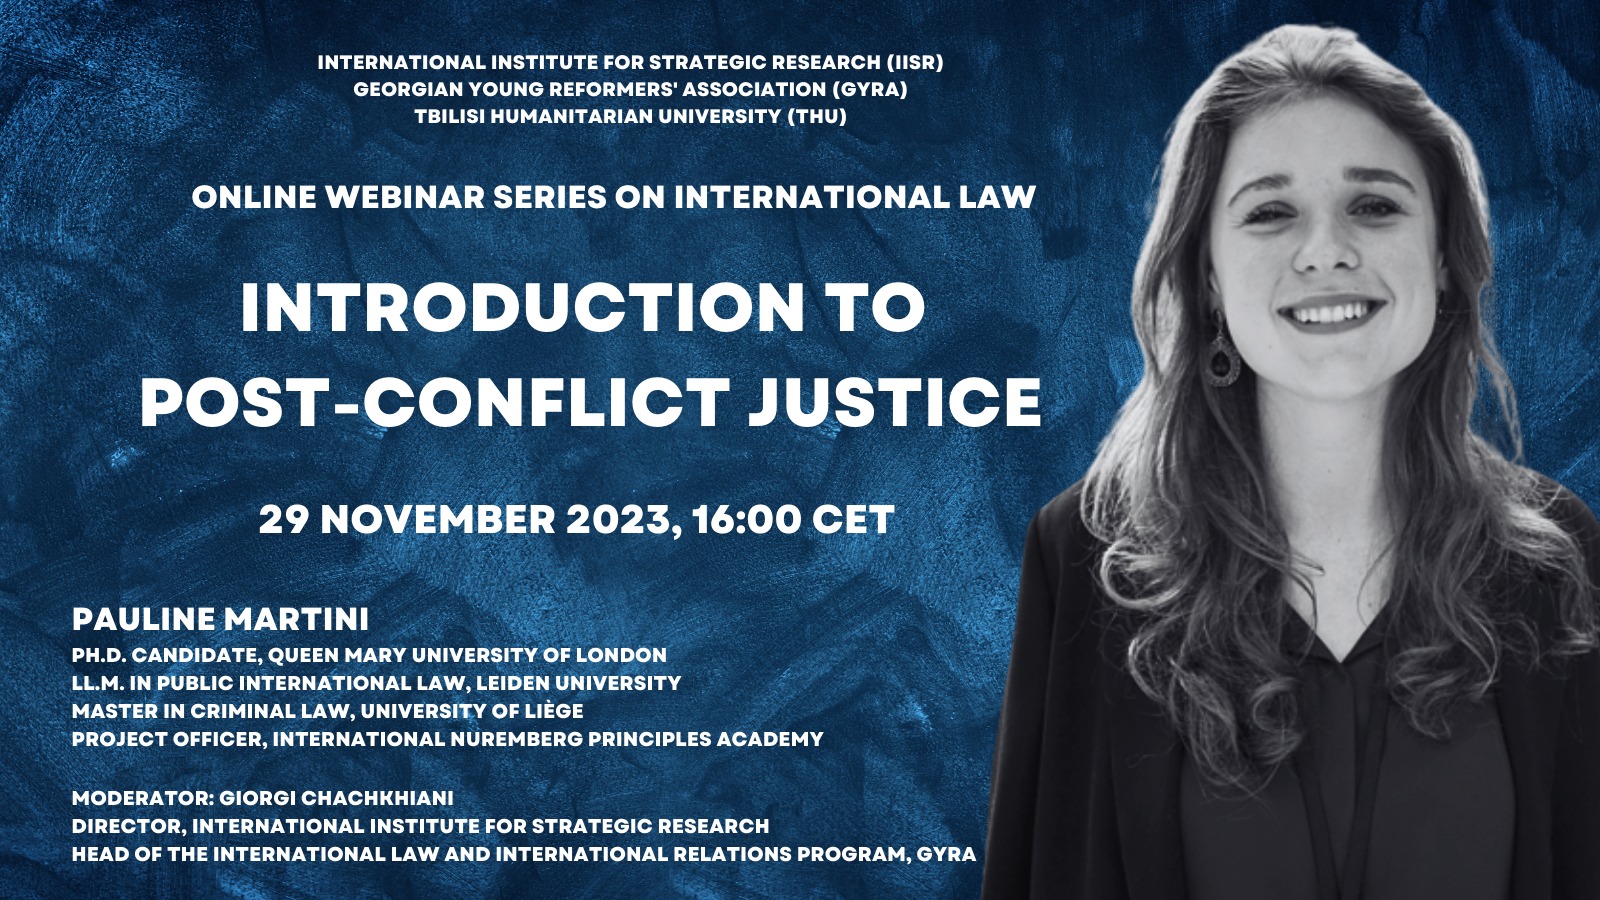 The webinar “Introduction to Post-Conflict Justice”